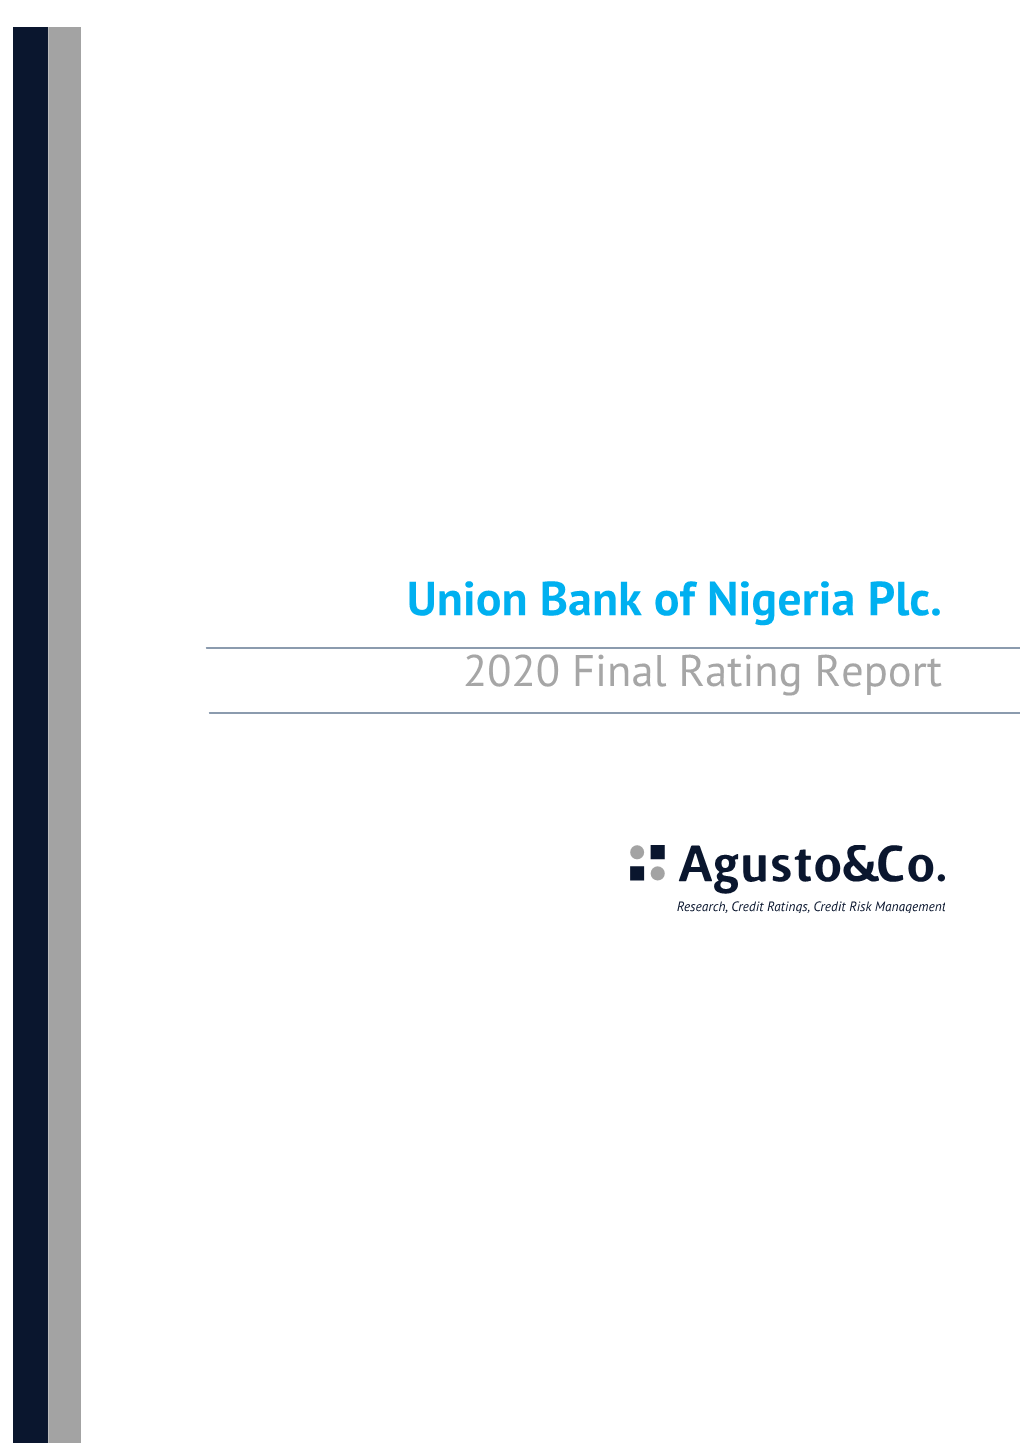 Union Bank of Nigeria Plc. 2020 Final Rating Report